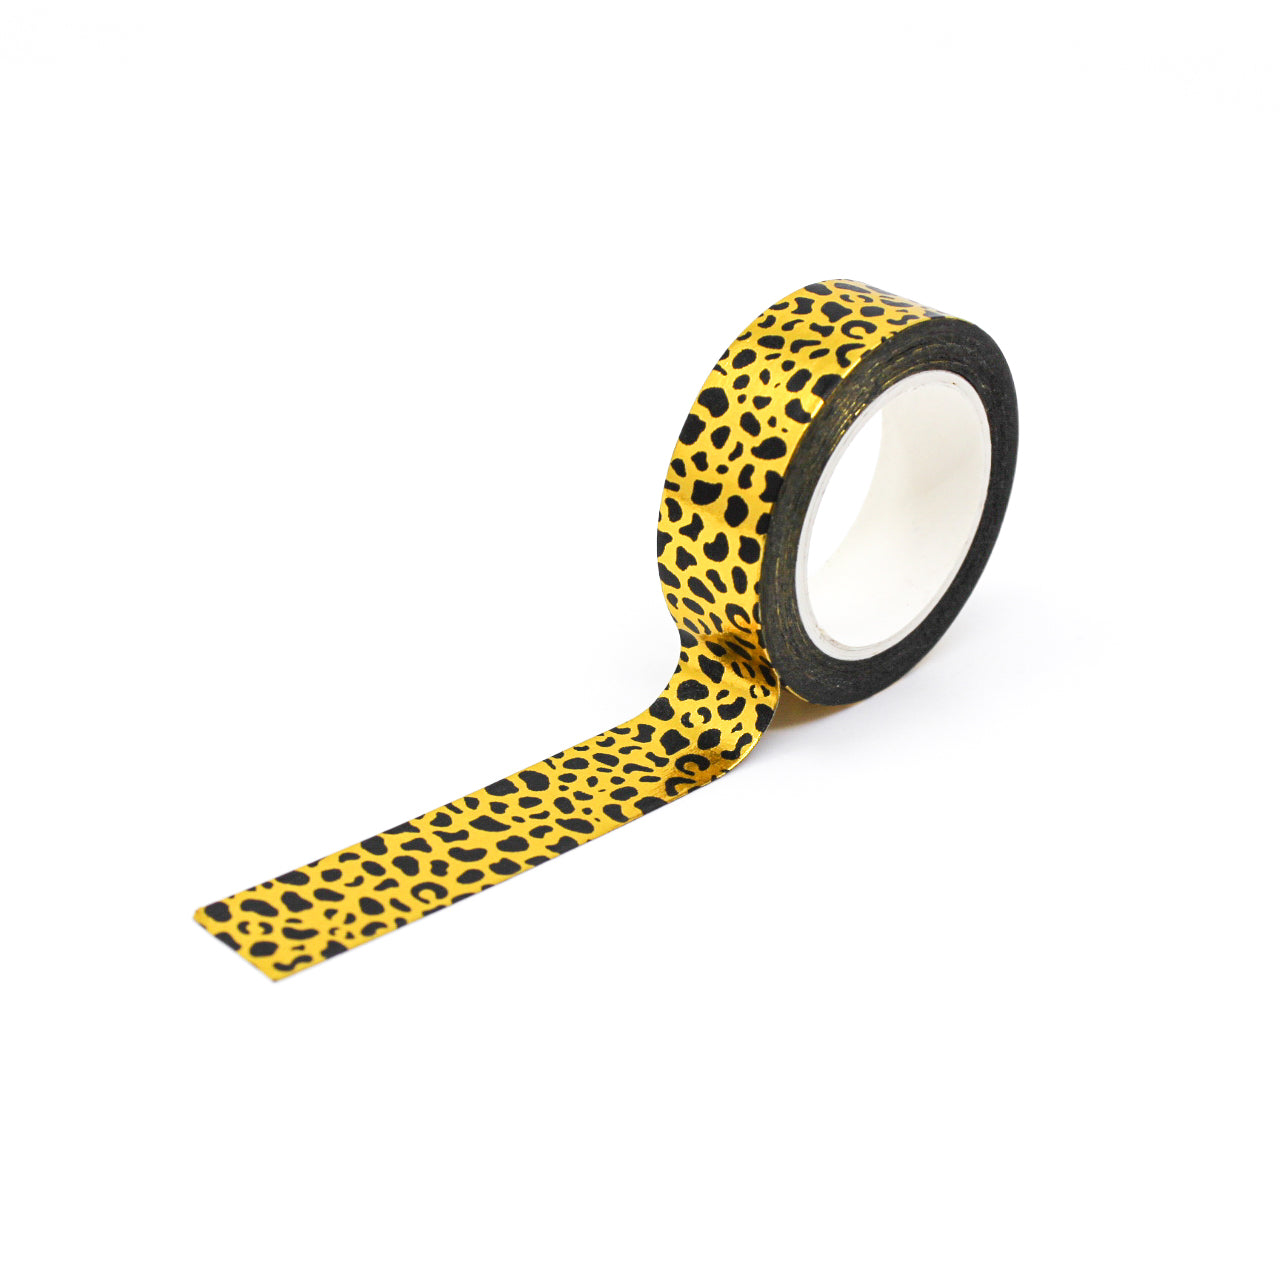 Add a touch of wild elegance to your crafts with our Gold Foil Leopard Animal Print Washi Tape, featuring a luxurious leopard print design in shimmering gold foil. Perfect for adding a stylish and exotic flair to your projects. This tape is sold at BBB Supplies Craft Shop.